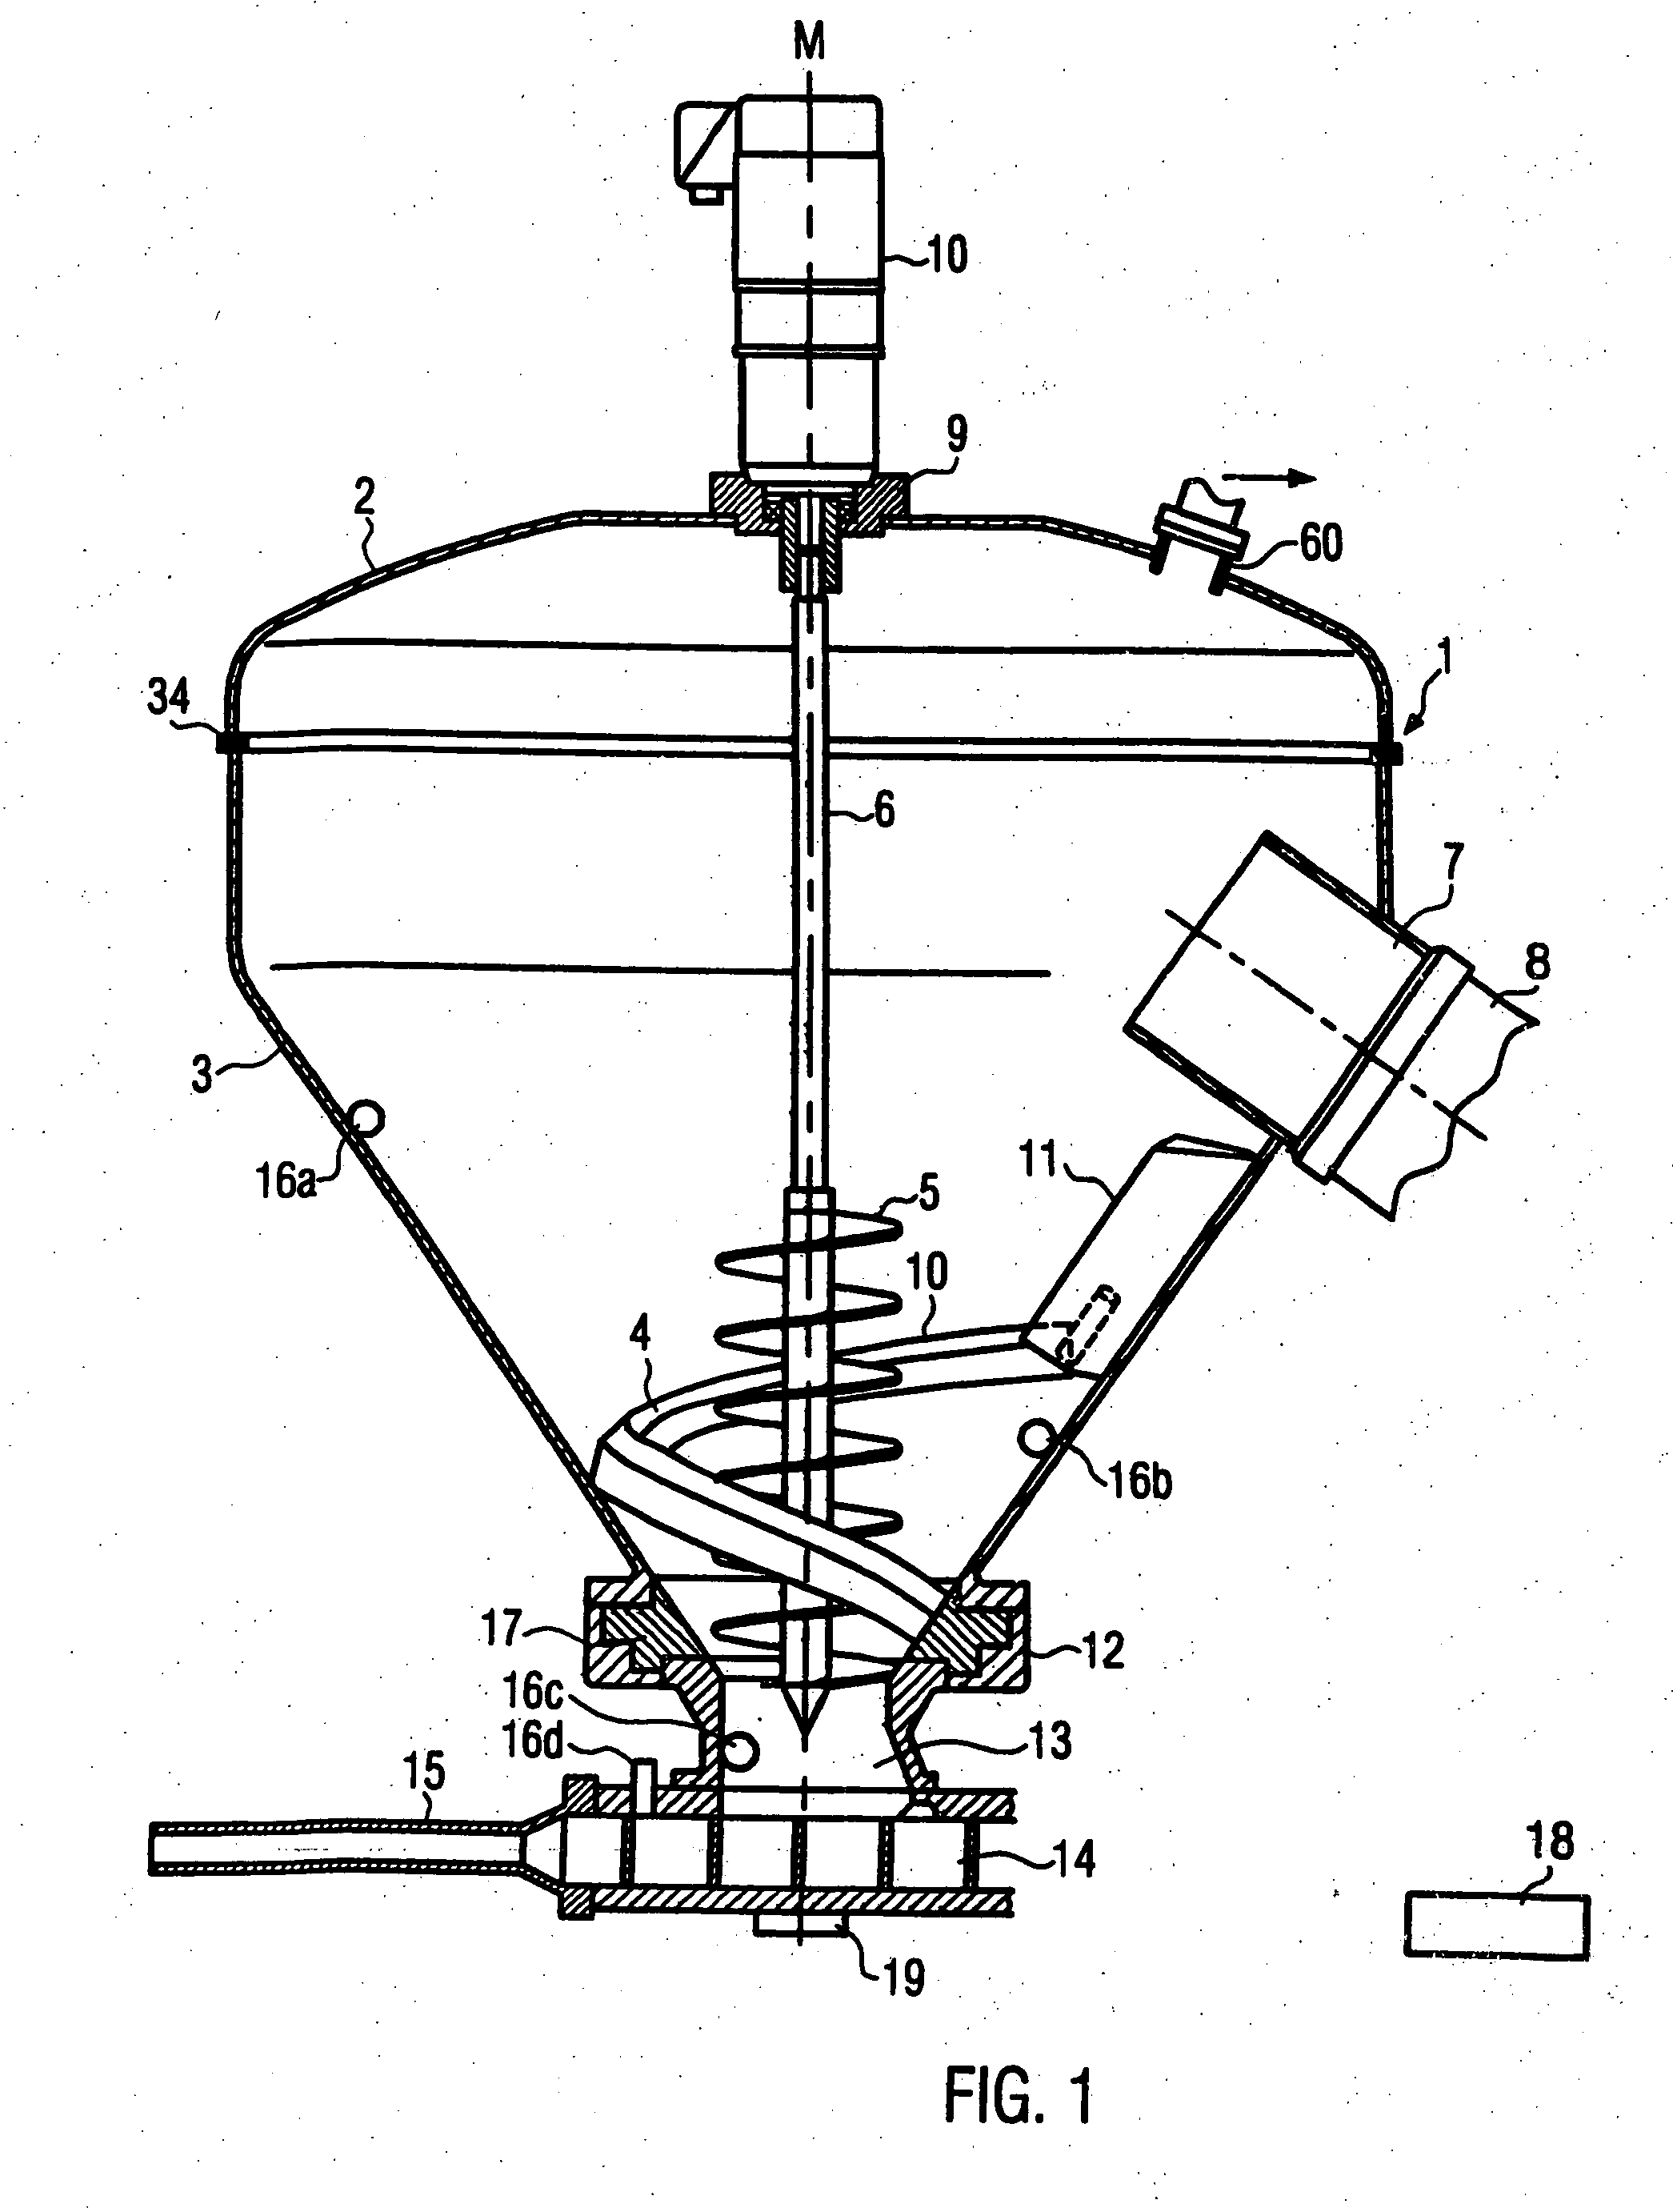 Filling machine and method of feeding paste masses from a hopper into a conveying mechanism